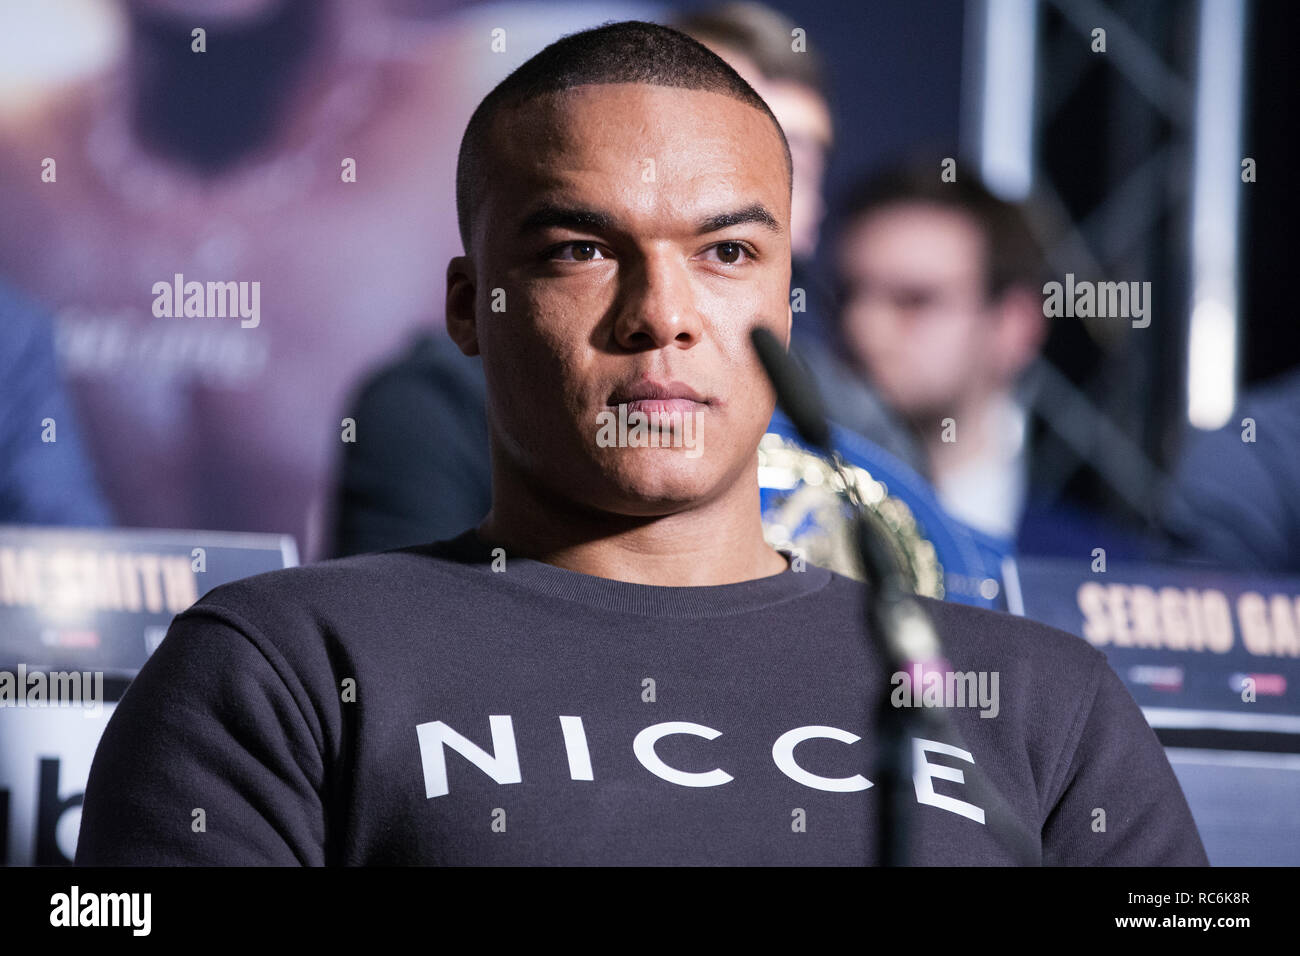 London, UK. 14th January, 2019. Ipswich heavyweight prospect Fabio Wardley appears at the press conference for a Matchroom Boxing card at the 02 on 2nd February headed by a European Super-Welterweight Championship fight between Sergio Garcia and Ted Cheeseman. Credit: Mark Kerrison/Alamy Live News Stock Photo